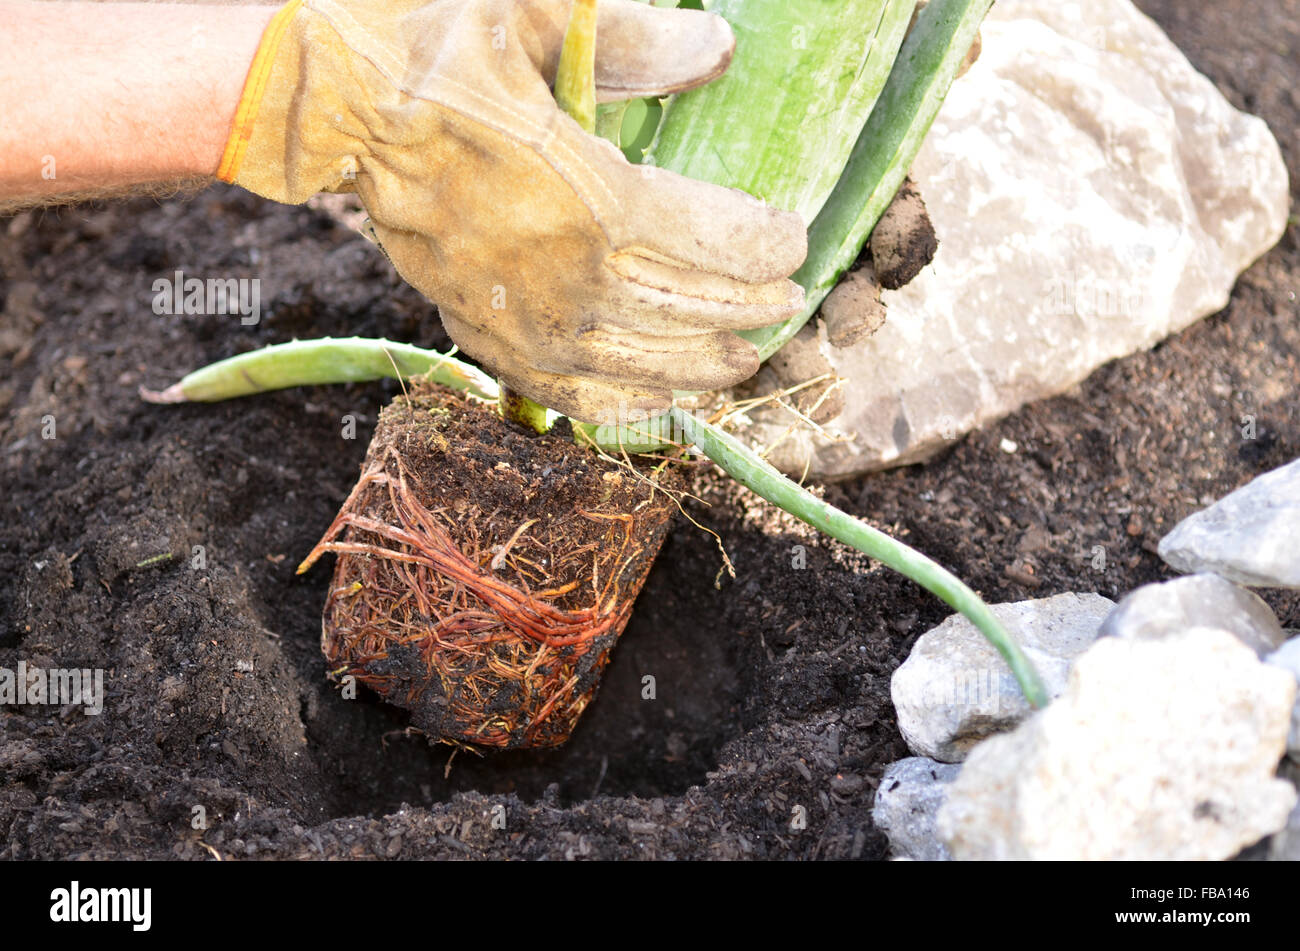 Gloved hands planting an aloe plant in a hole Stock Photo